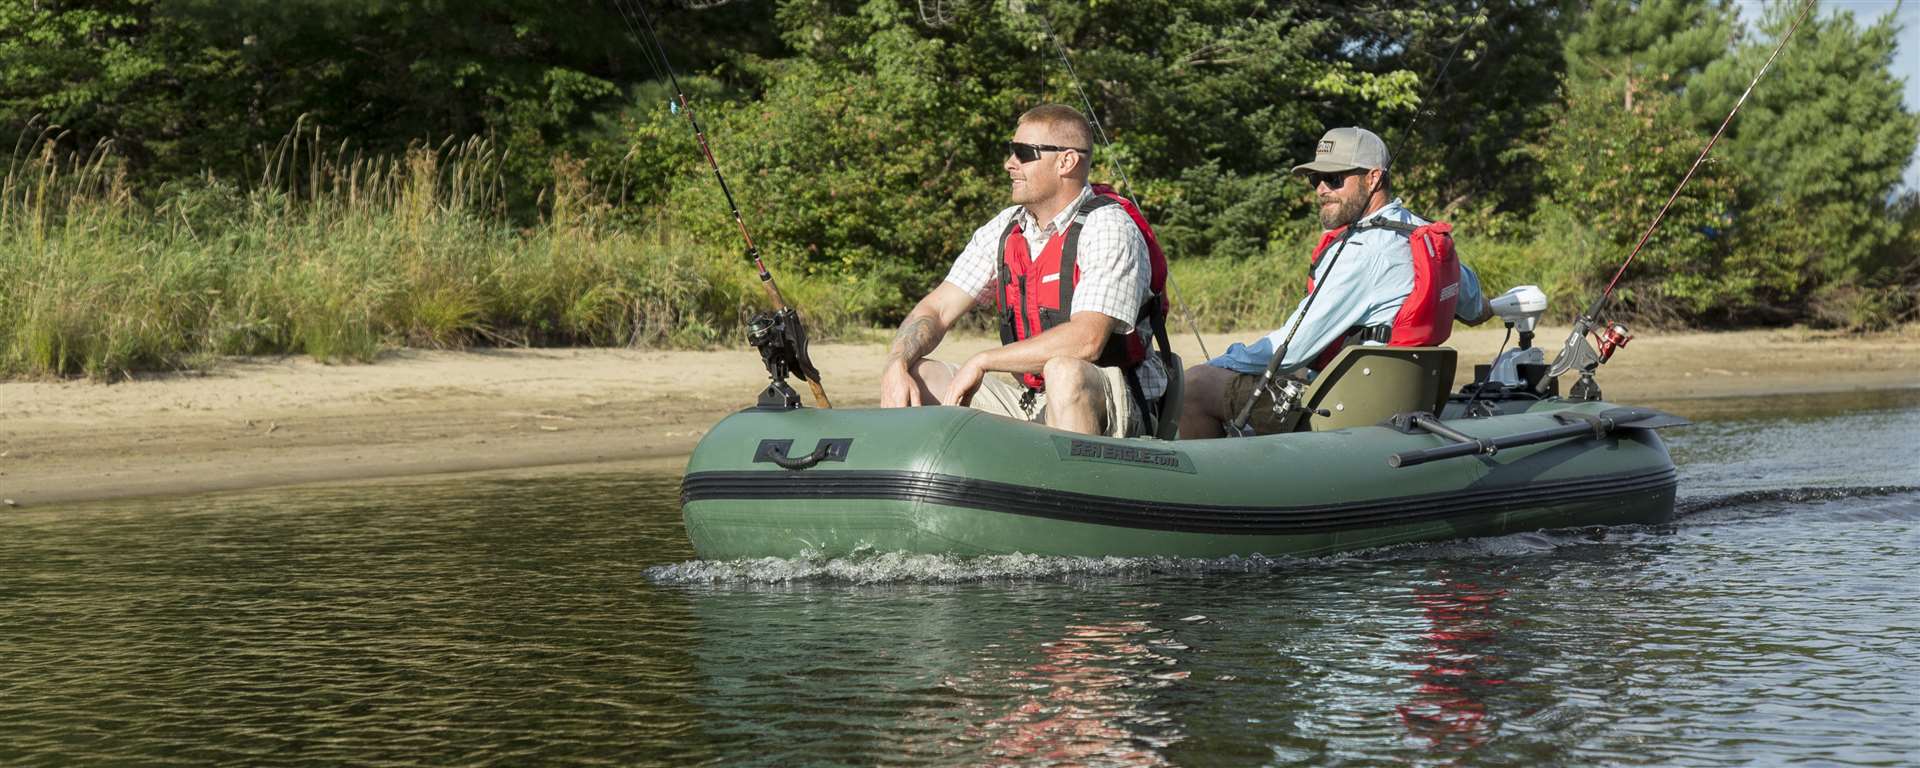 Sea Eagle-Stealth Stalker 10 Pro Package Inflatable Fishing Boat